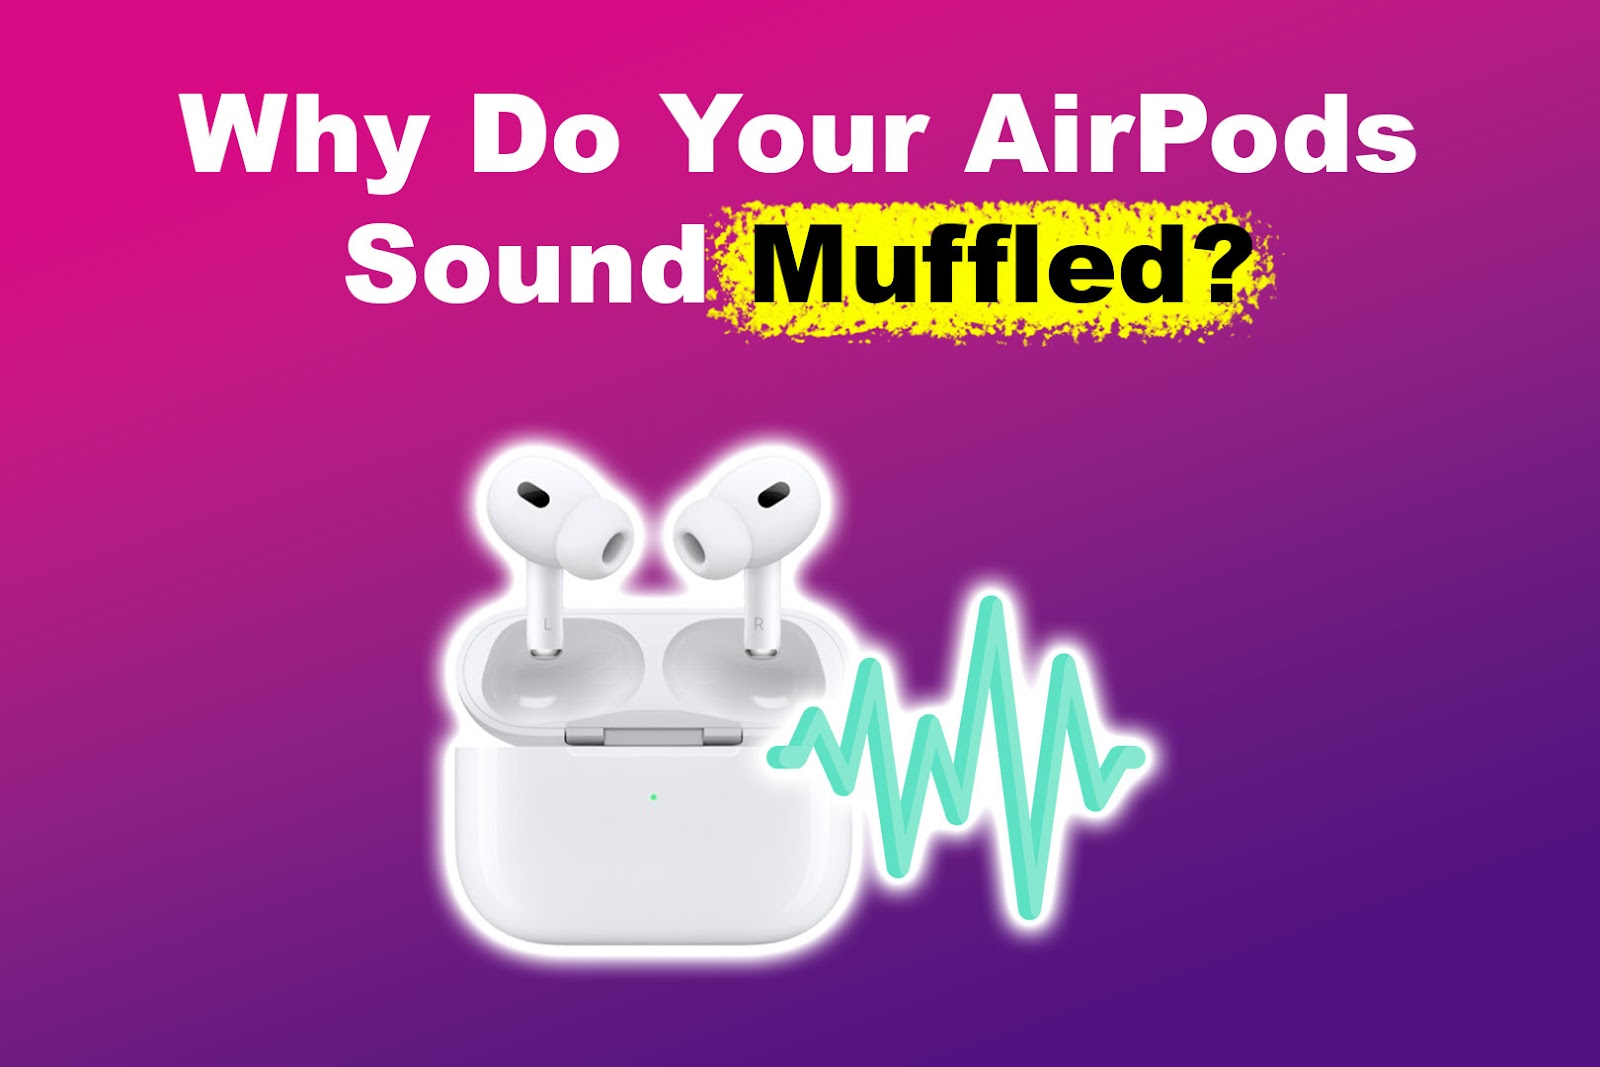 Why Do Your AirPods Sound Muffled? [5 Effective Solutions]